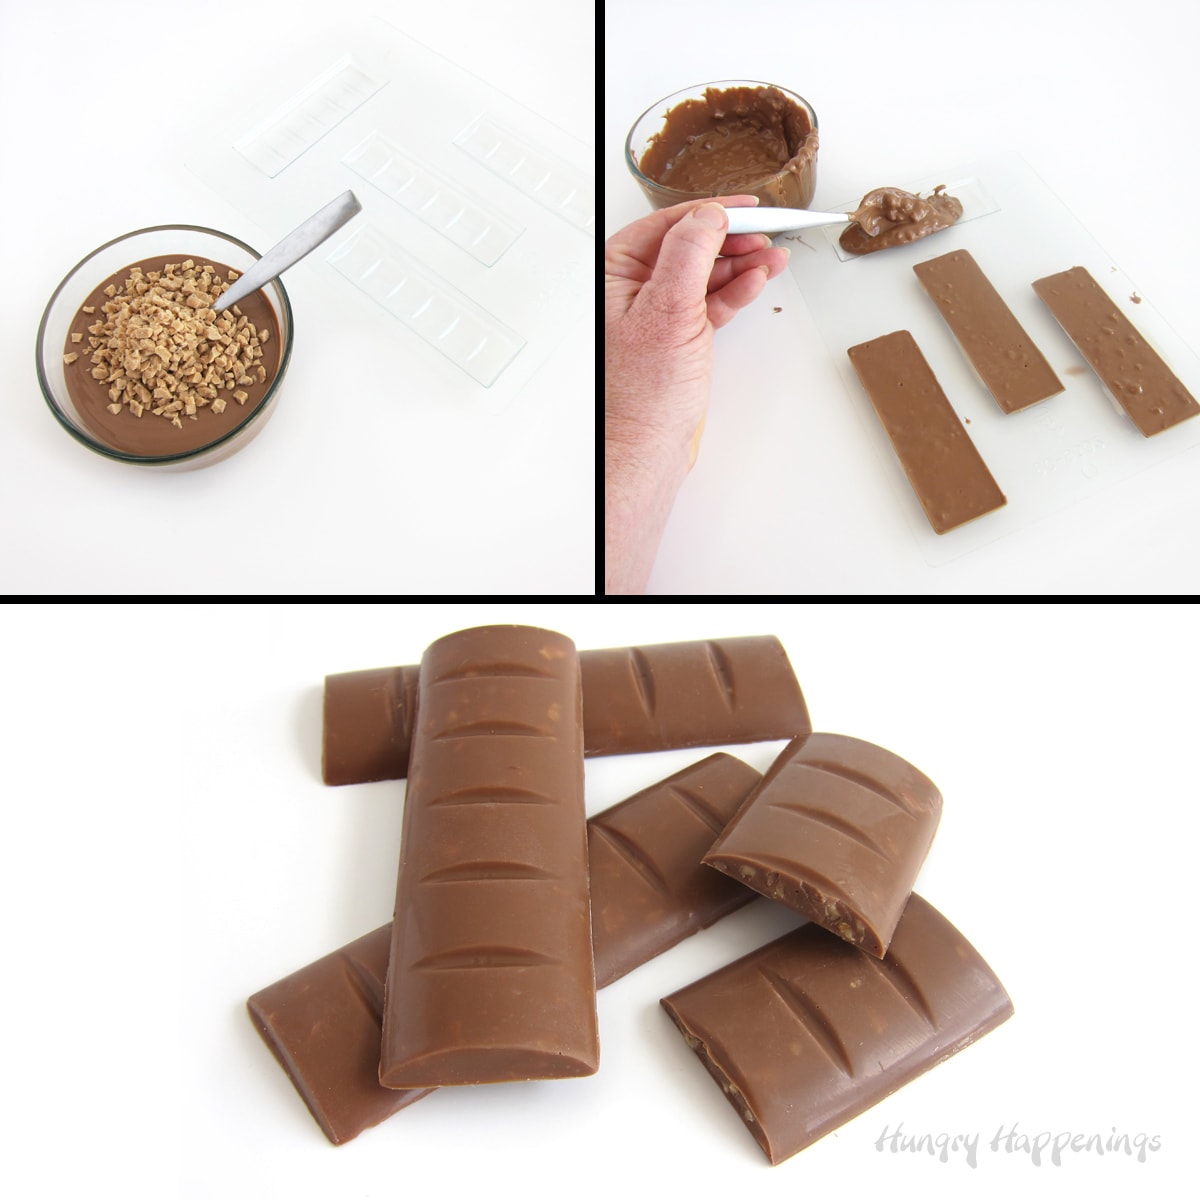 make milk chocolate toffee candy bars using a plastic candy mold